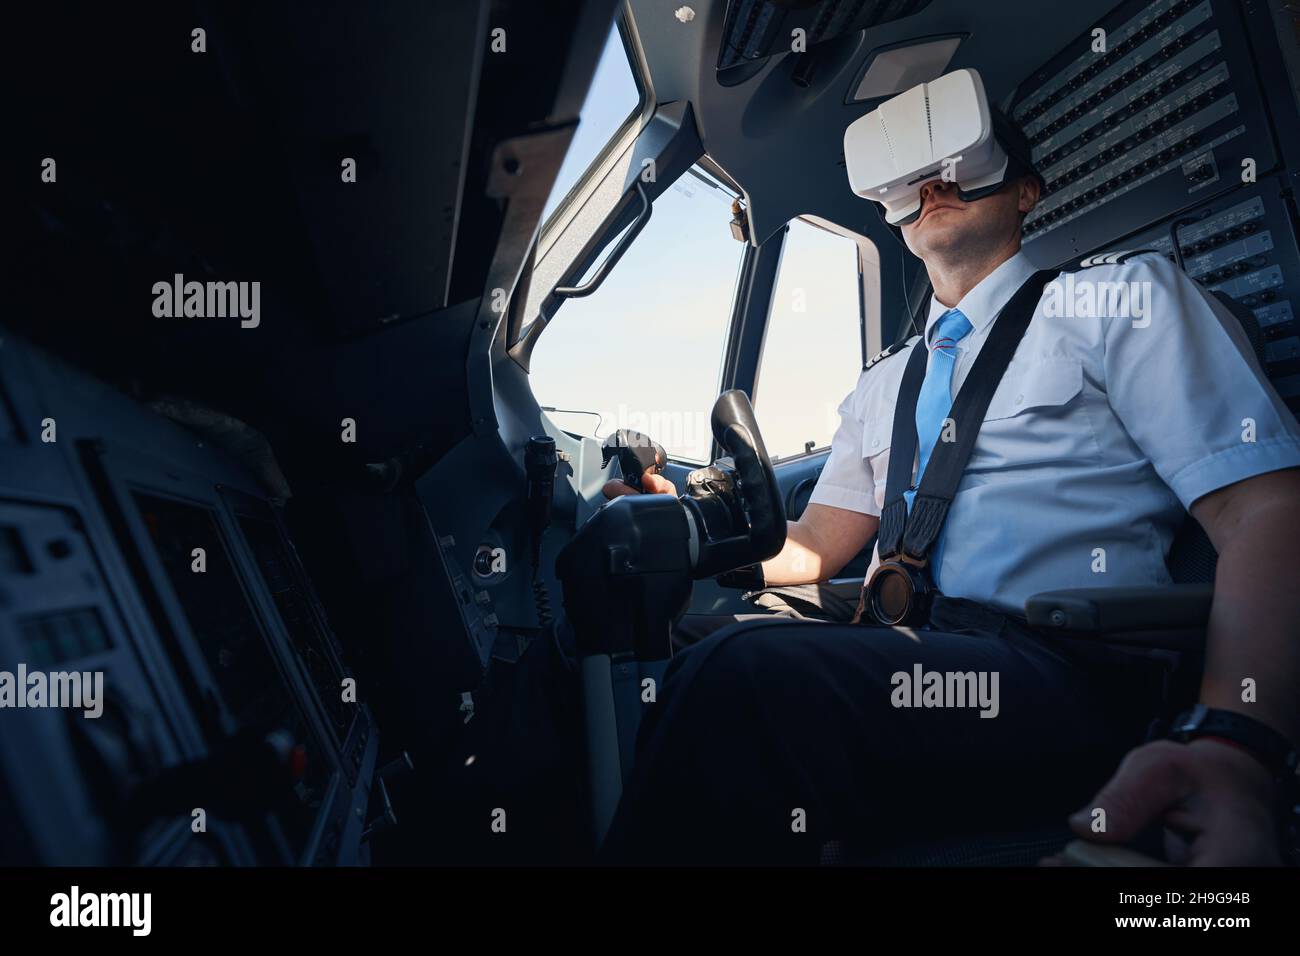 Man in augmented reality headset practising steering plane Stock Photo -  Alamy